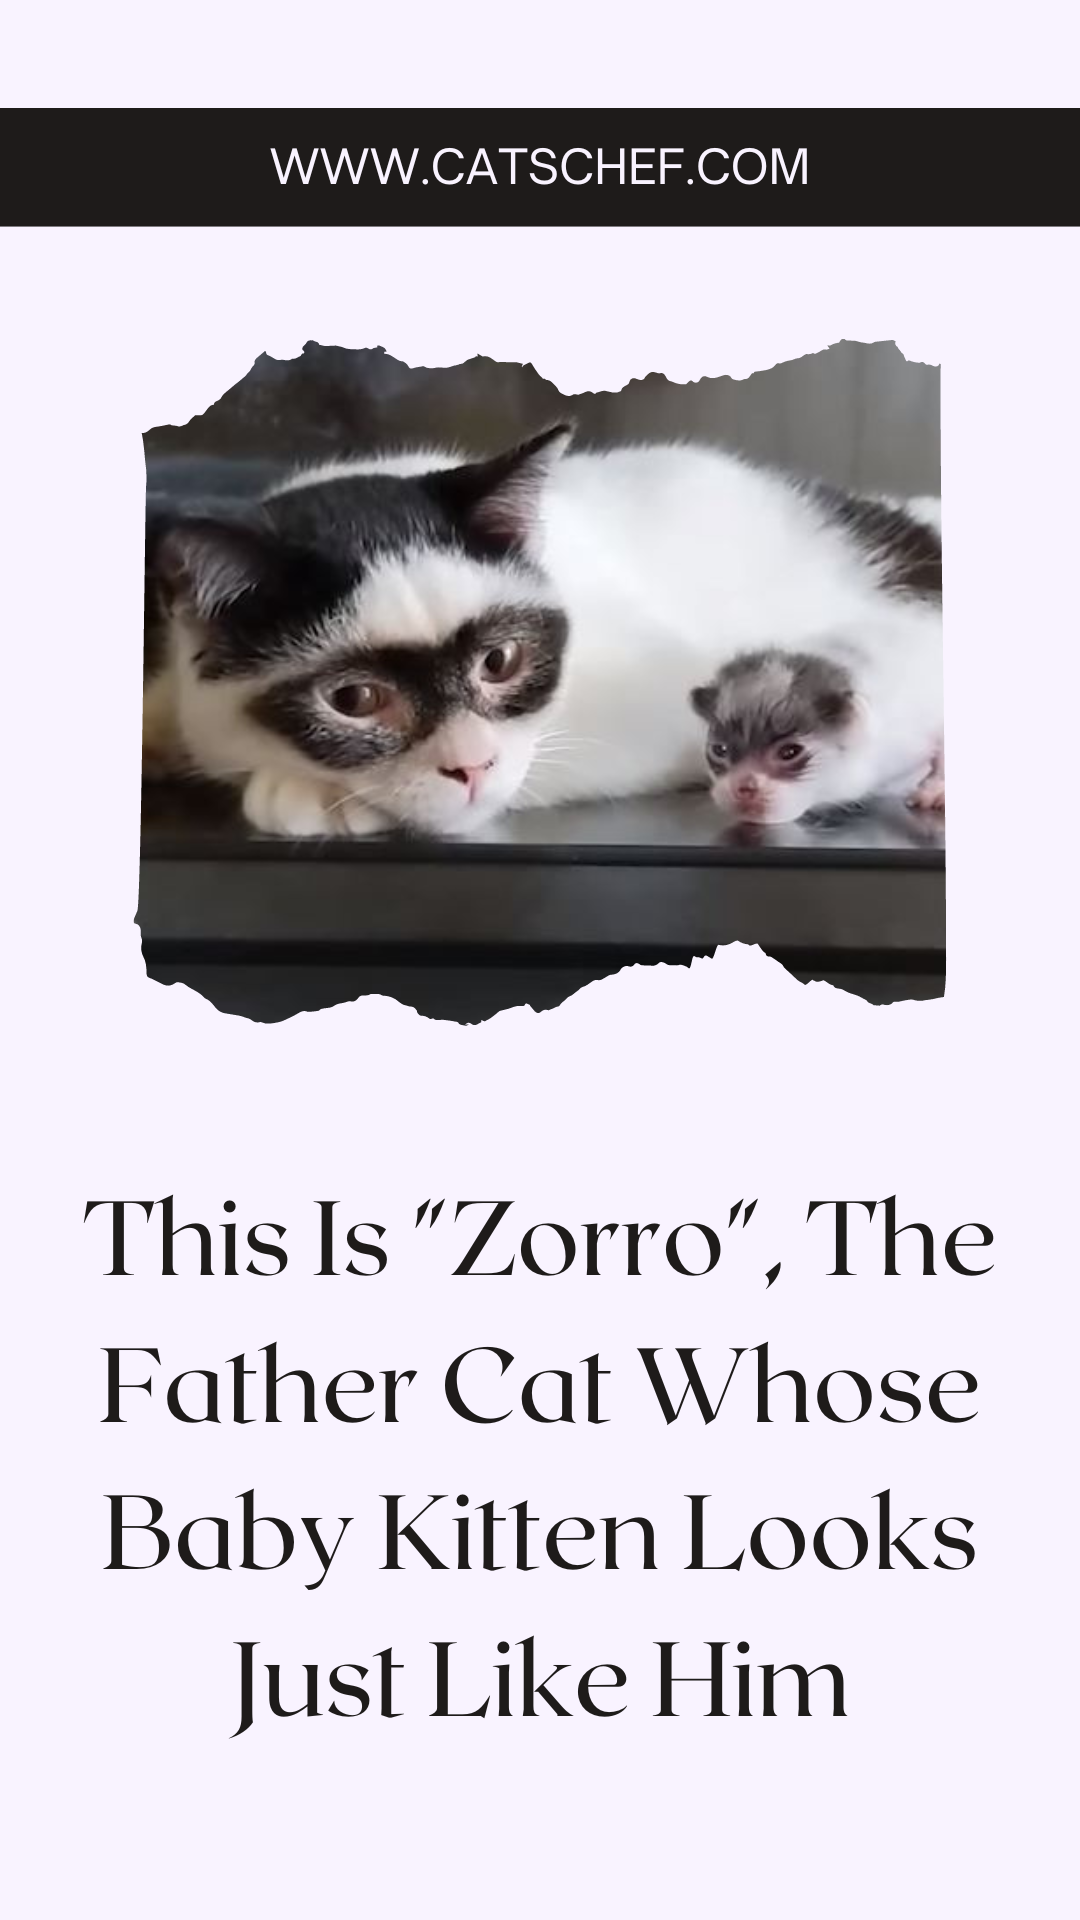 This Is "Zorro", The Father Cat Whose Baby Kitten Looks Just Like Him